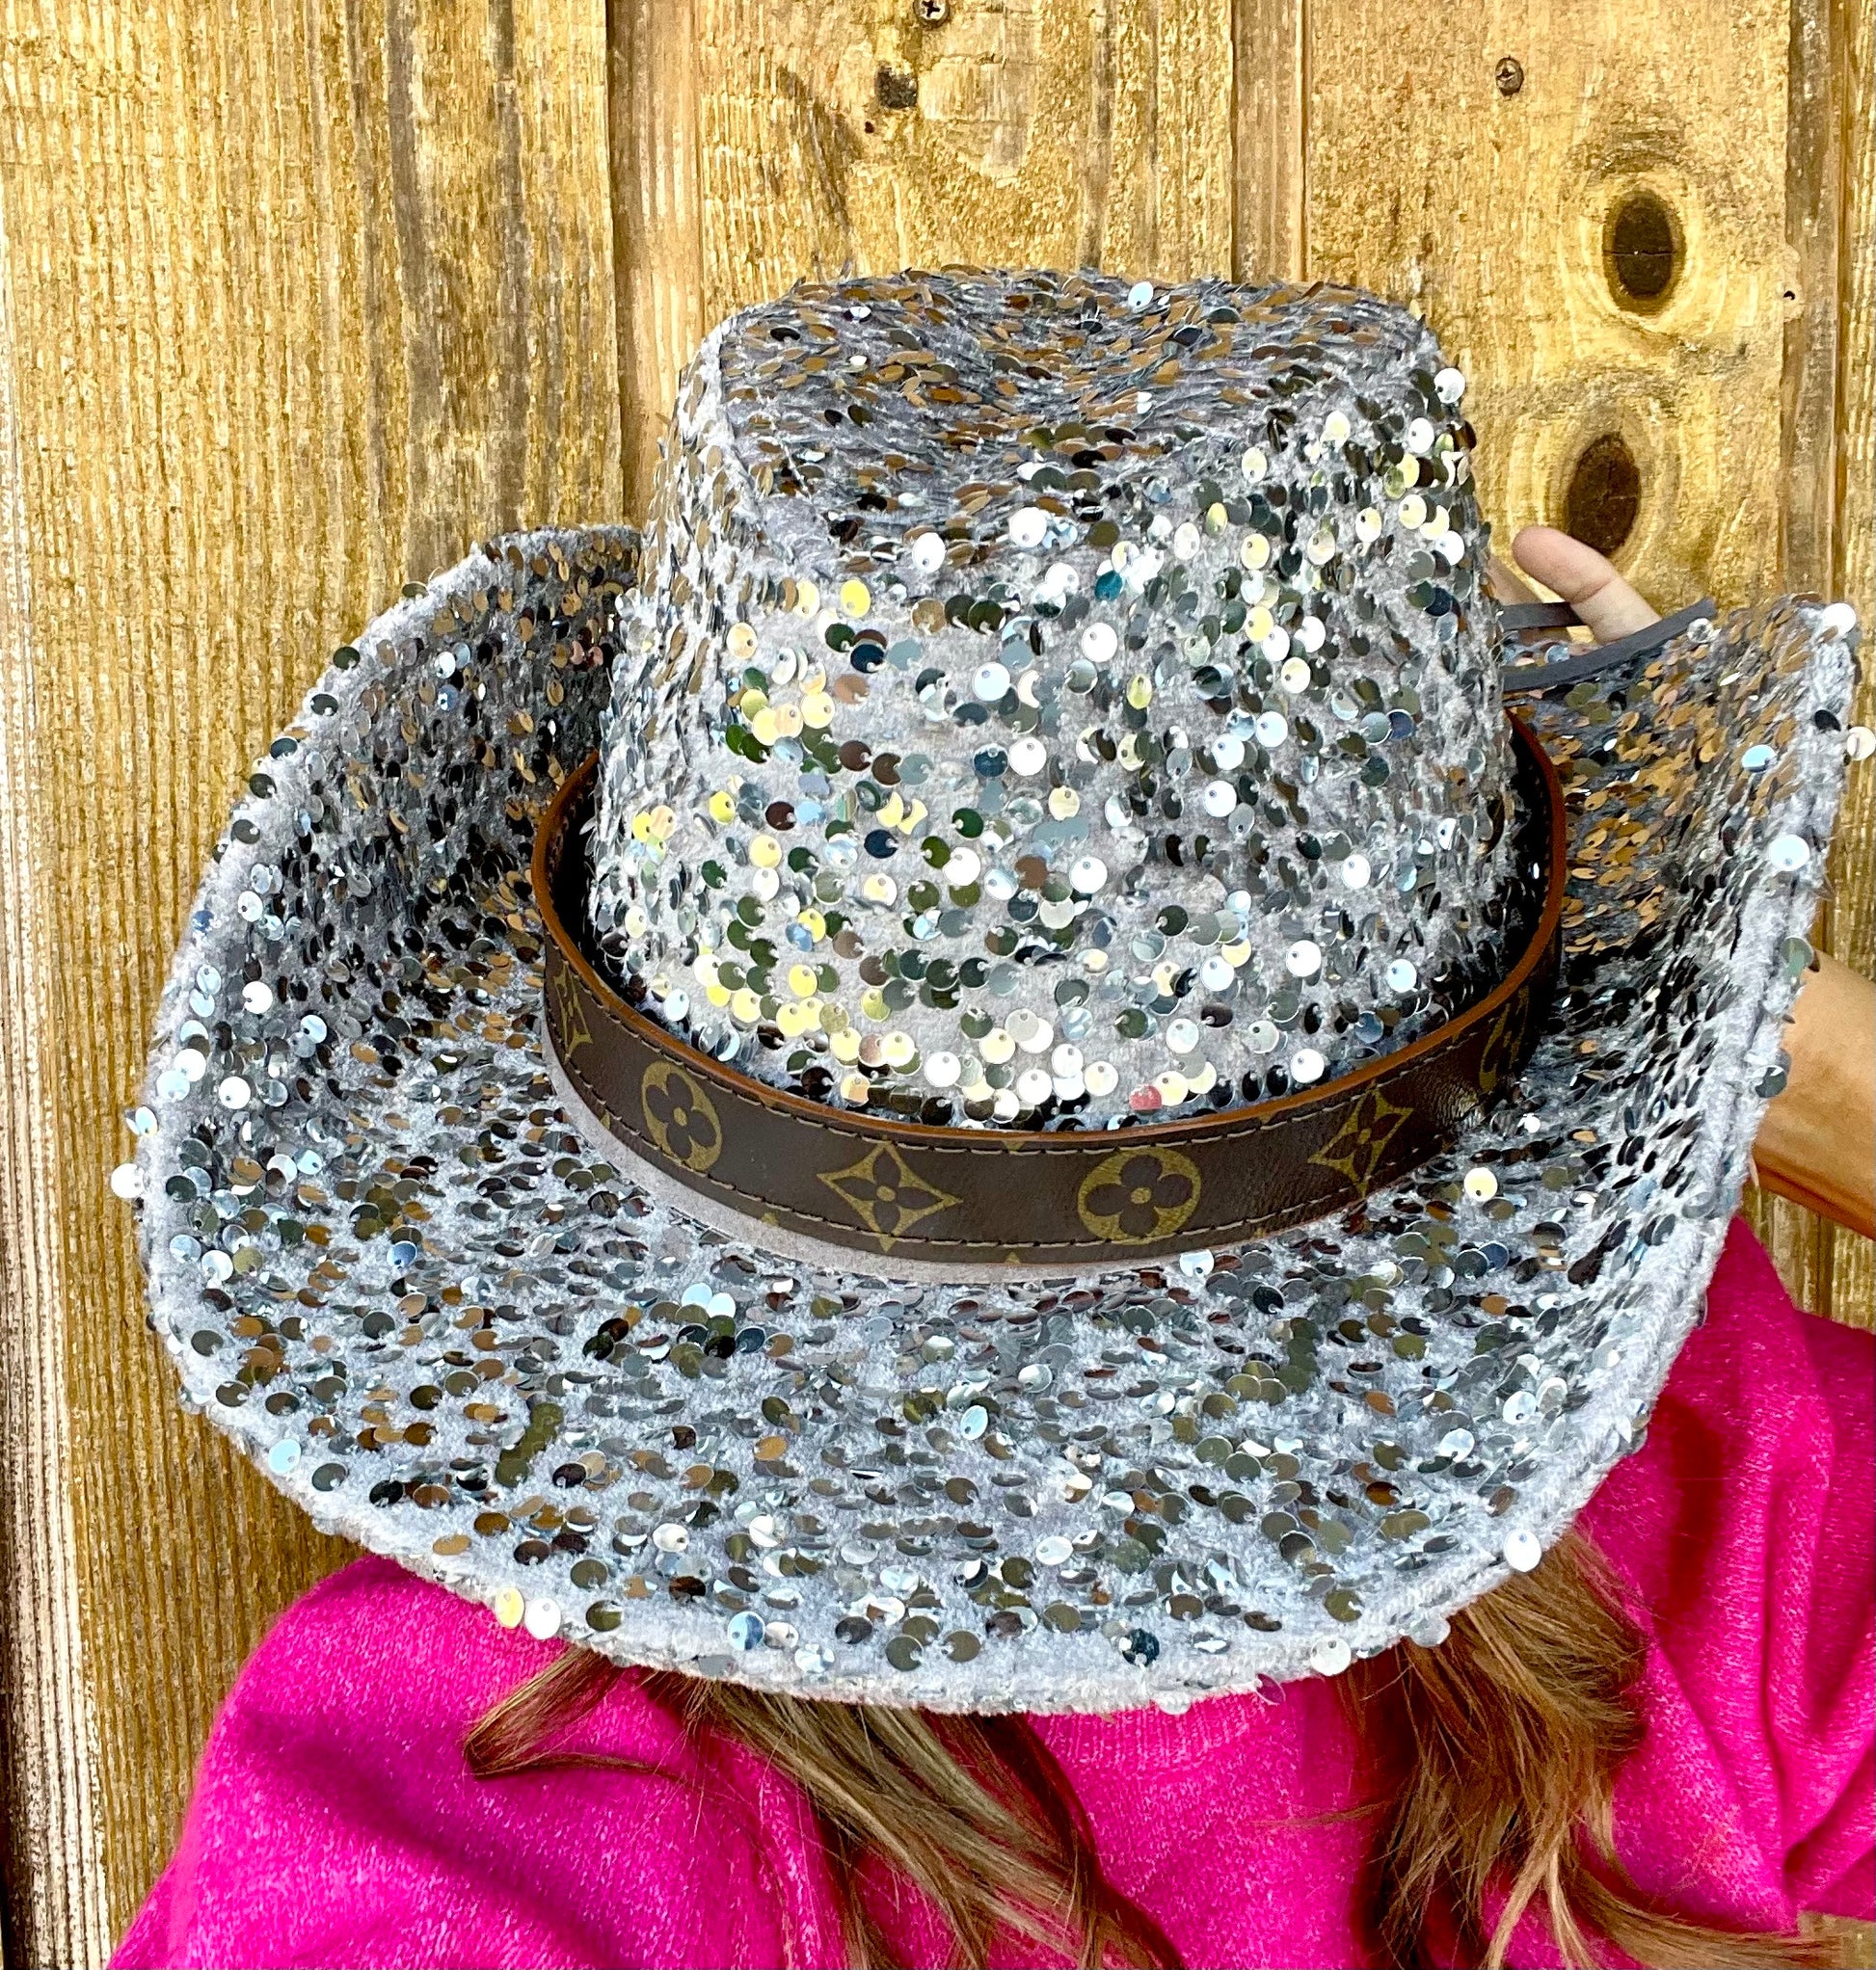 Silver Sequin Cowgirl Hat with flourish hat belt - Patches Of Upcycling